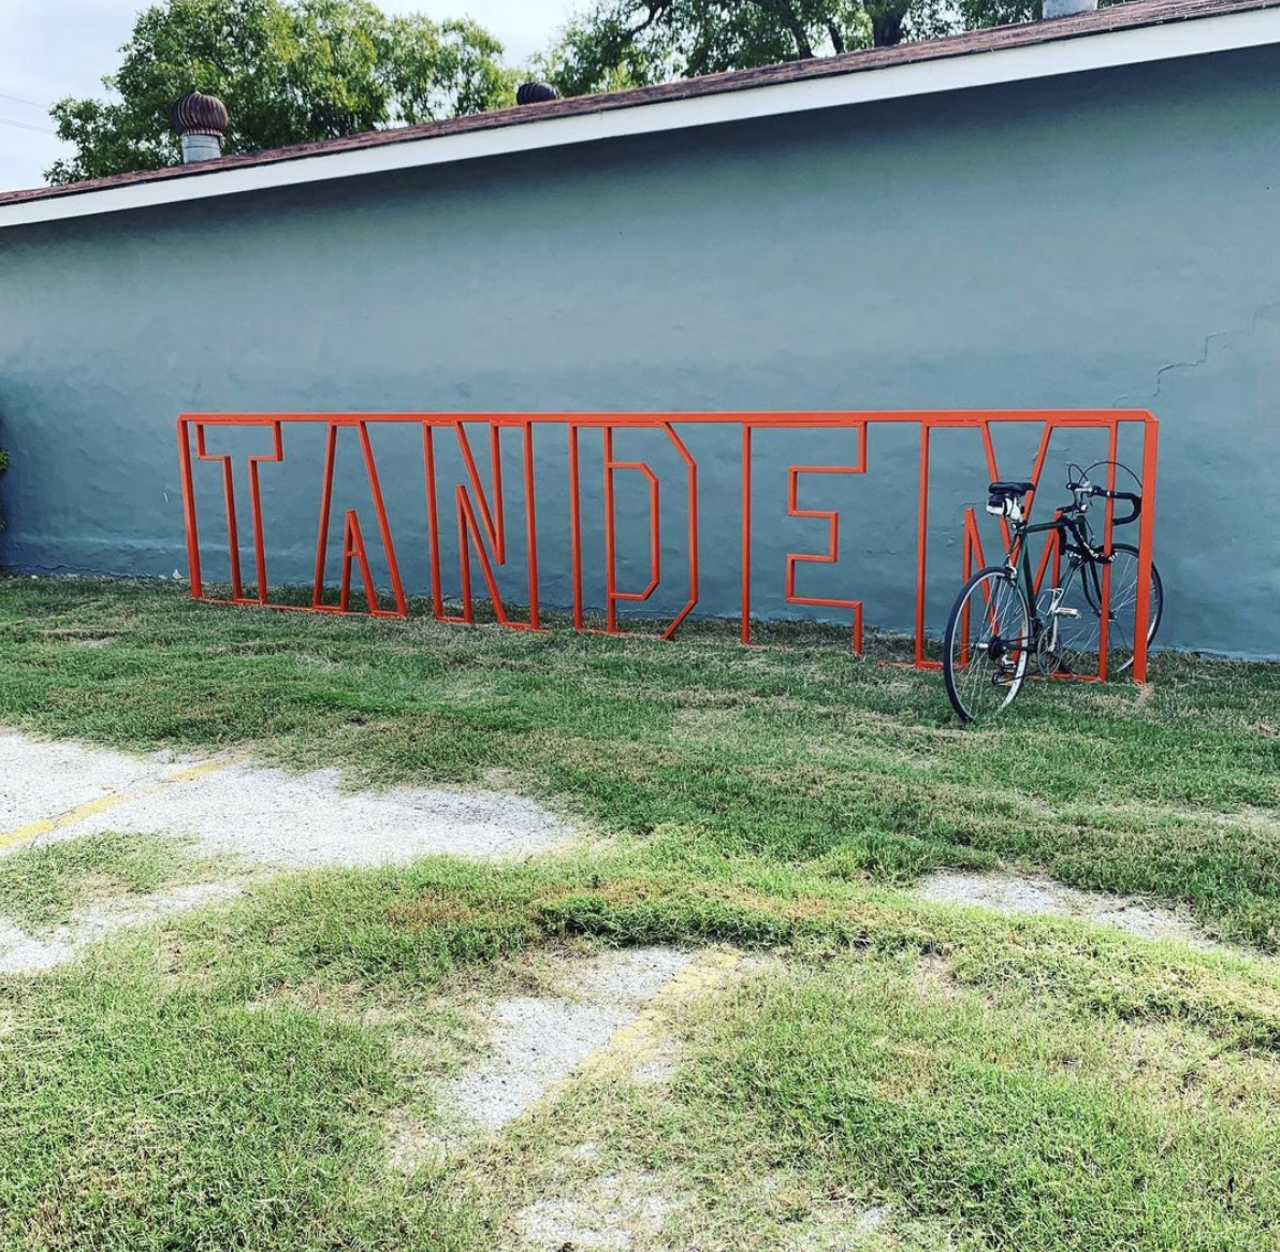 Tandem
310 Riverside Dr., (210) 455-5400, https://www.tandem-satx.com/
This newcomer to the scene offers coffee, beer and wine to the south SA neighborhood, complete with huge custom bike rack for safely keeping your bike.  
Photo via Instagram / tandemsatx